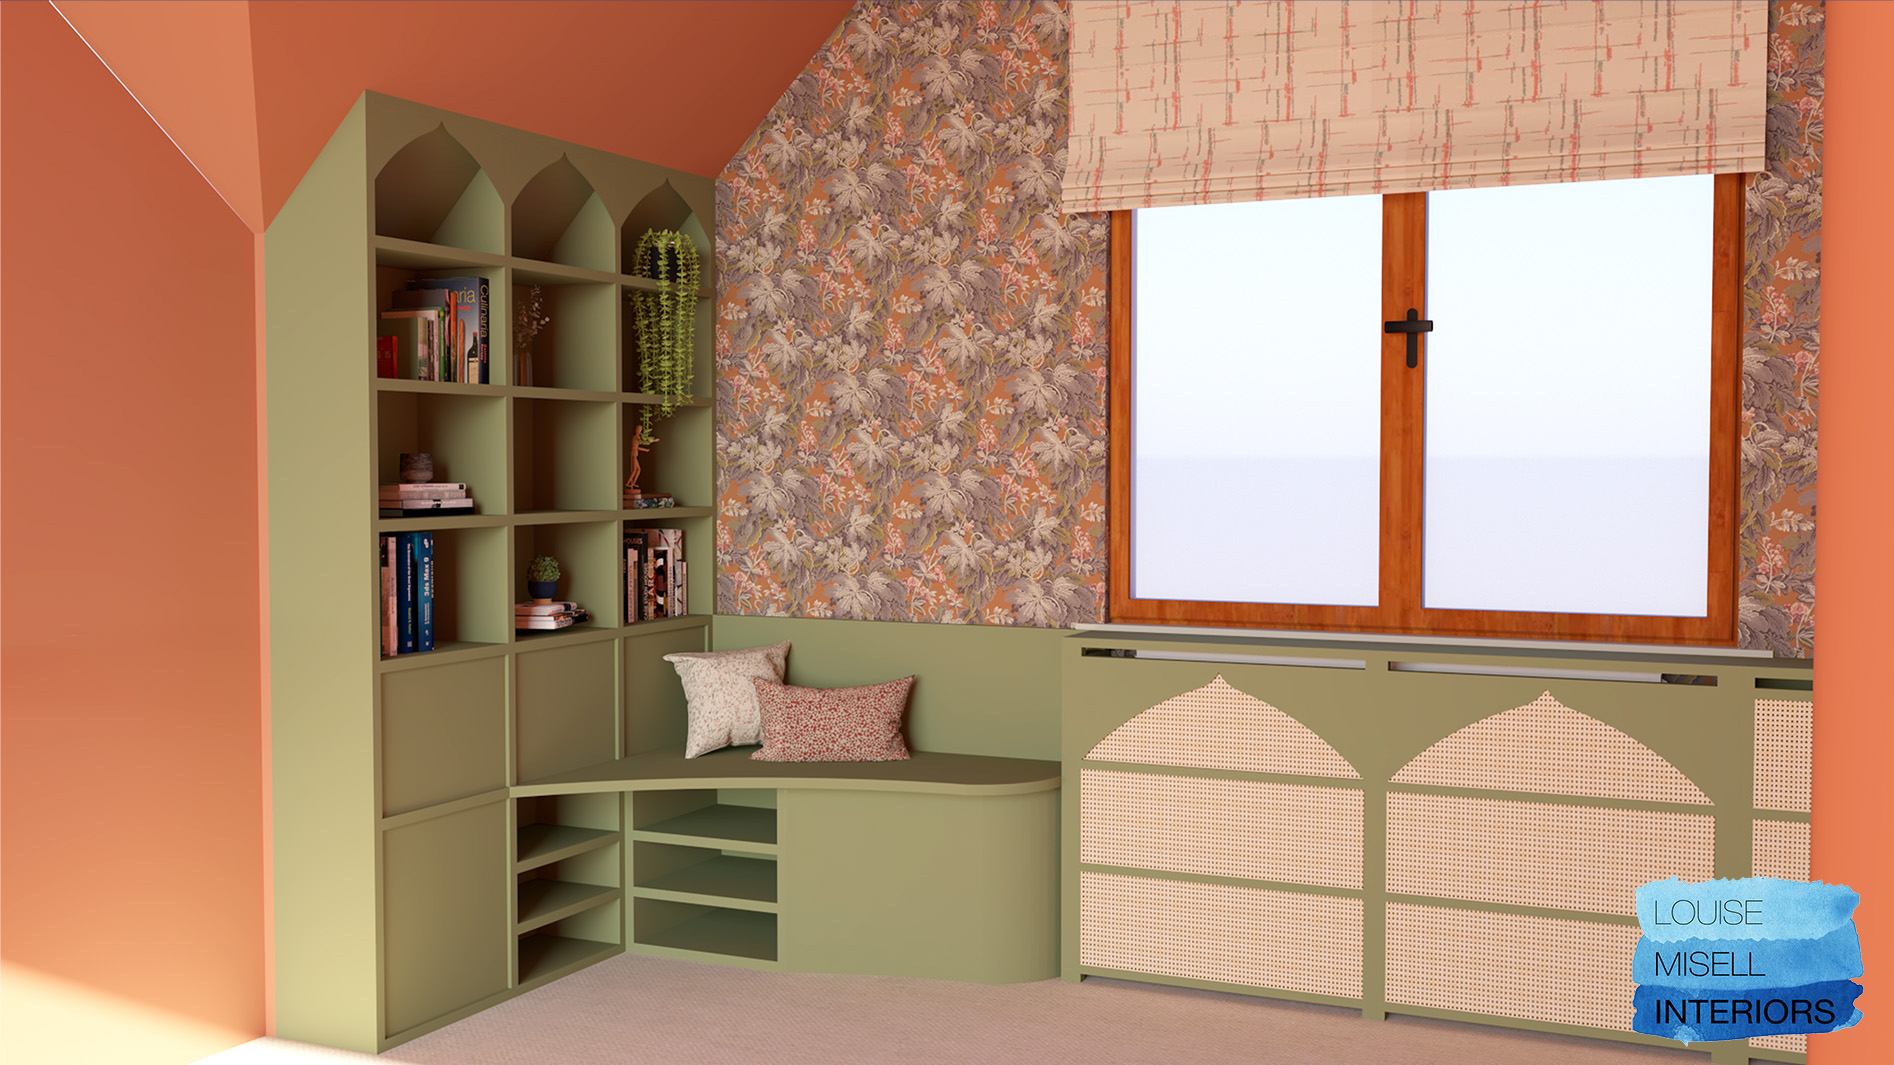 A computer generated image showing the design for the bookcase and radiator cover for the mezzanine.